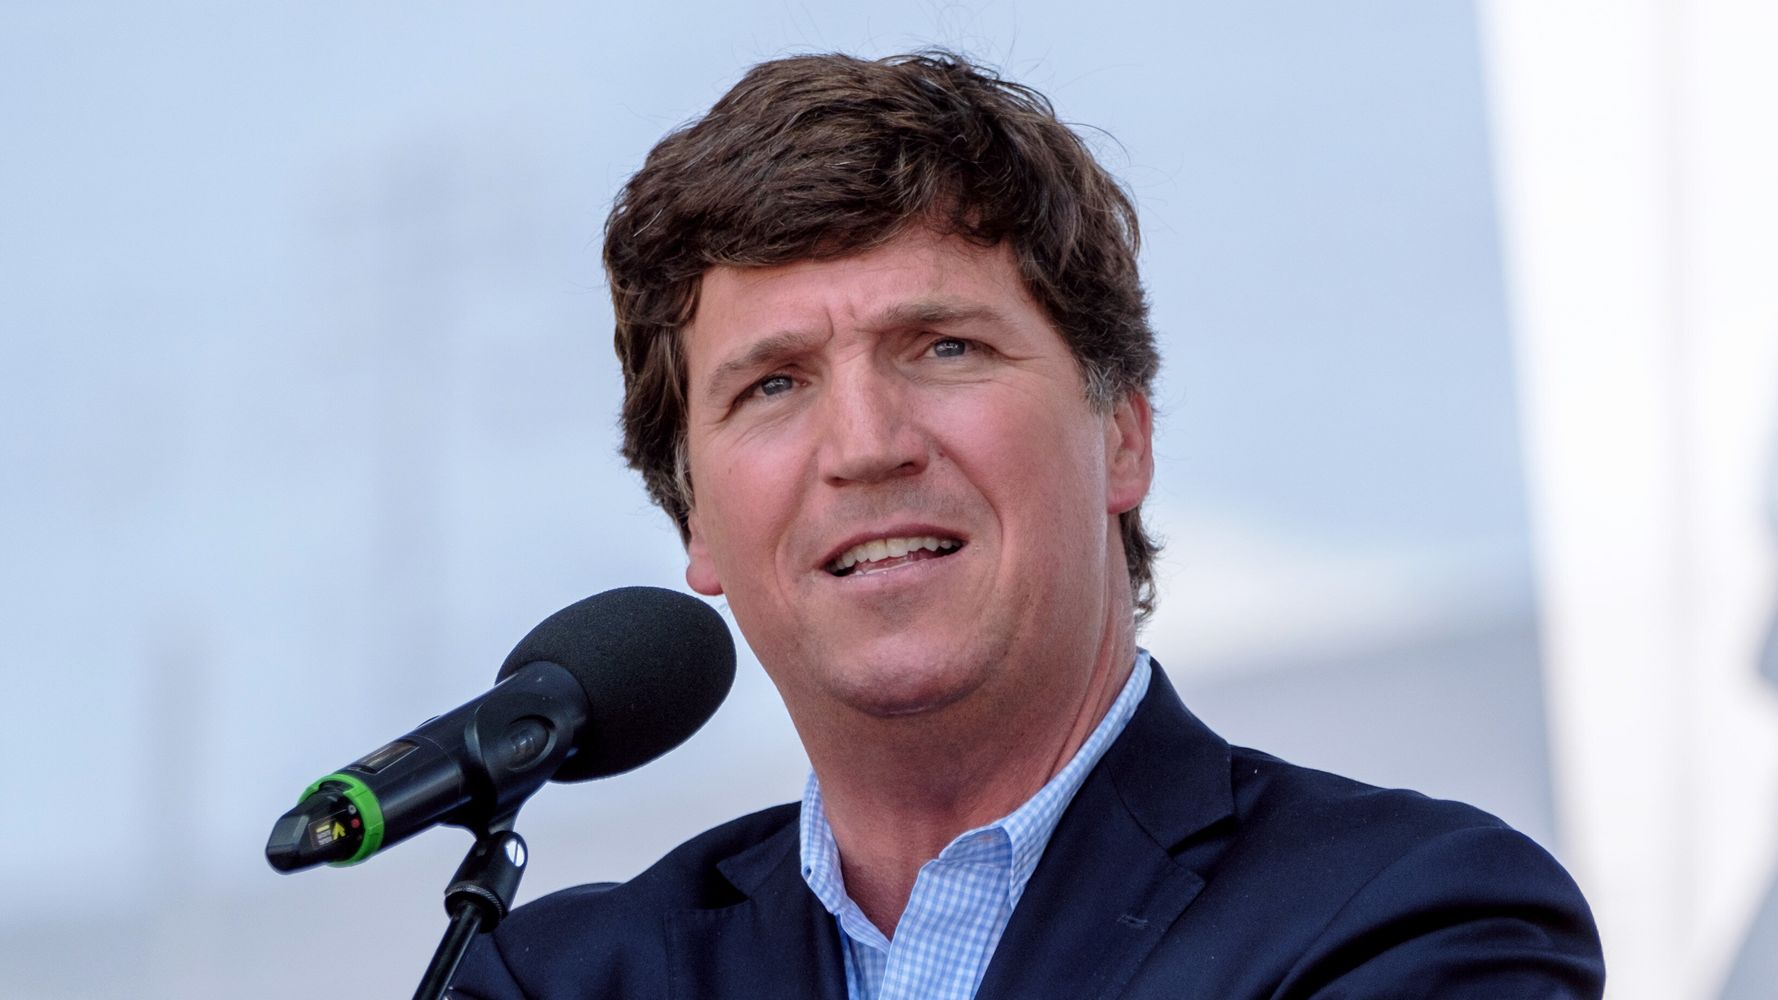 Leaked Kremlin Memo Told Russian Media To Feature Lots Of Tucker Carlson: Report